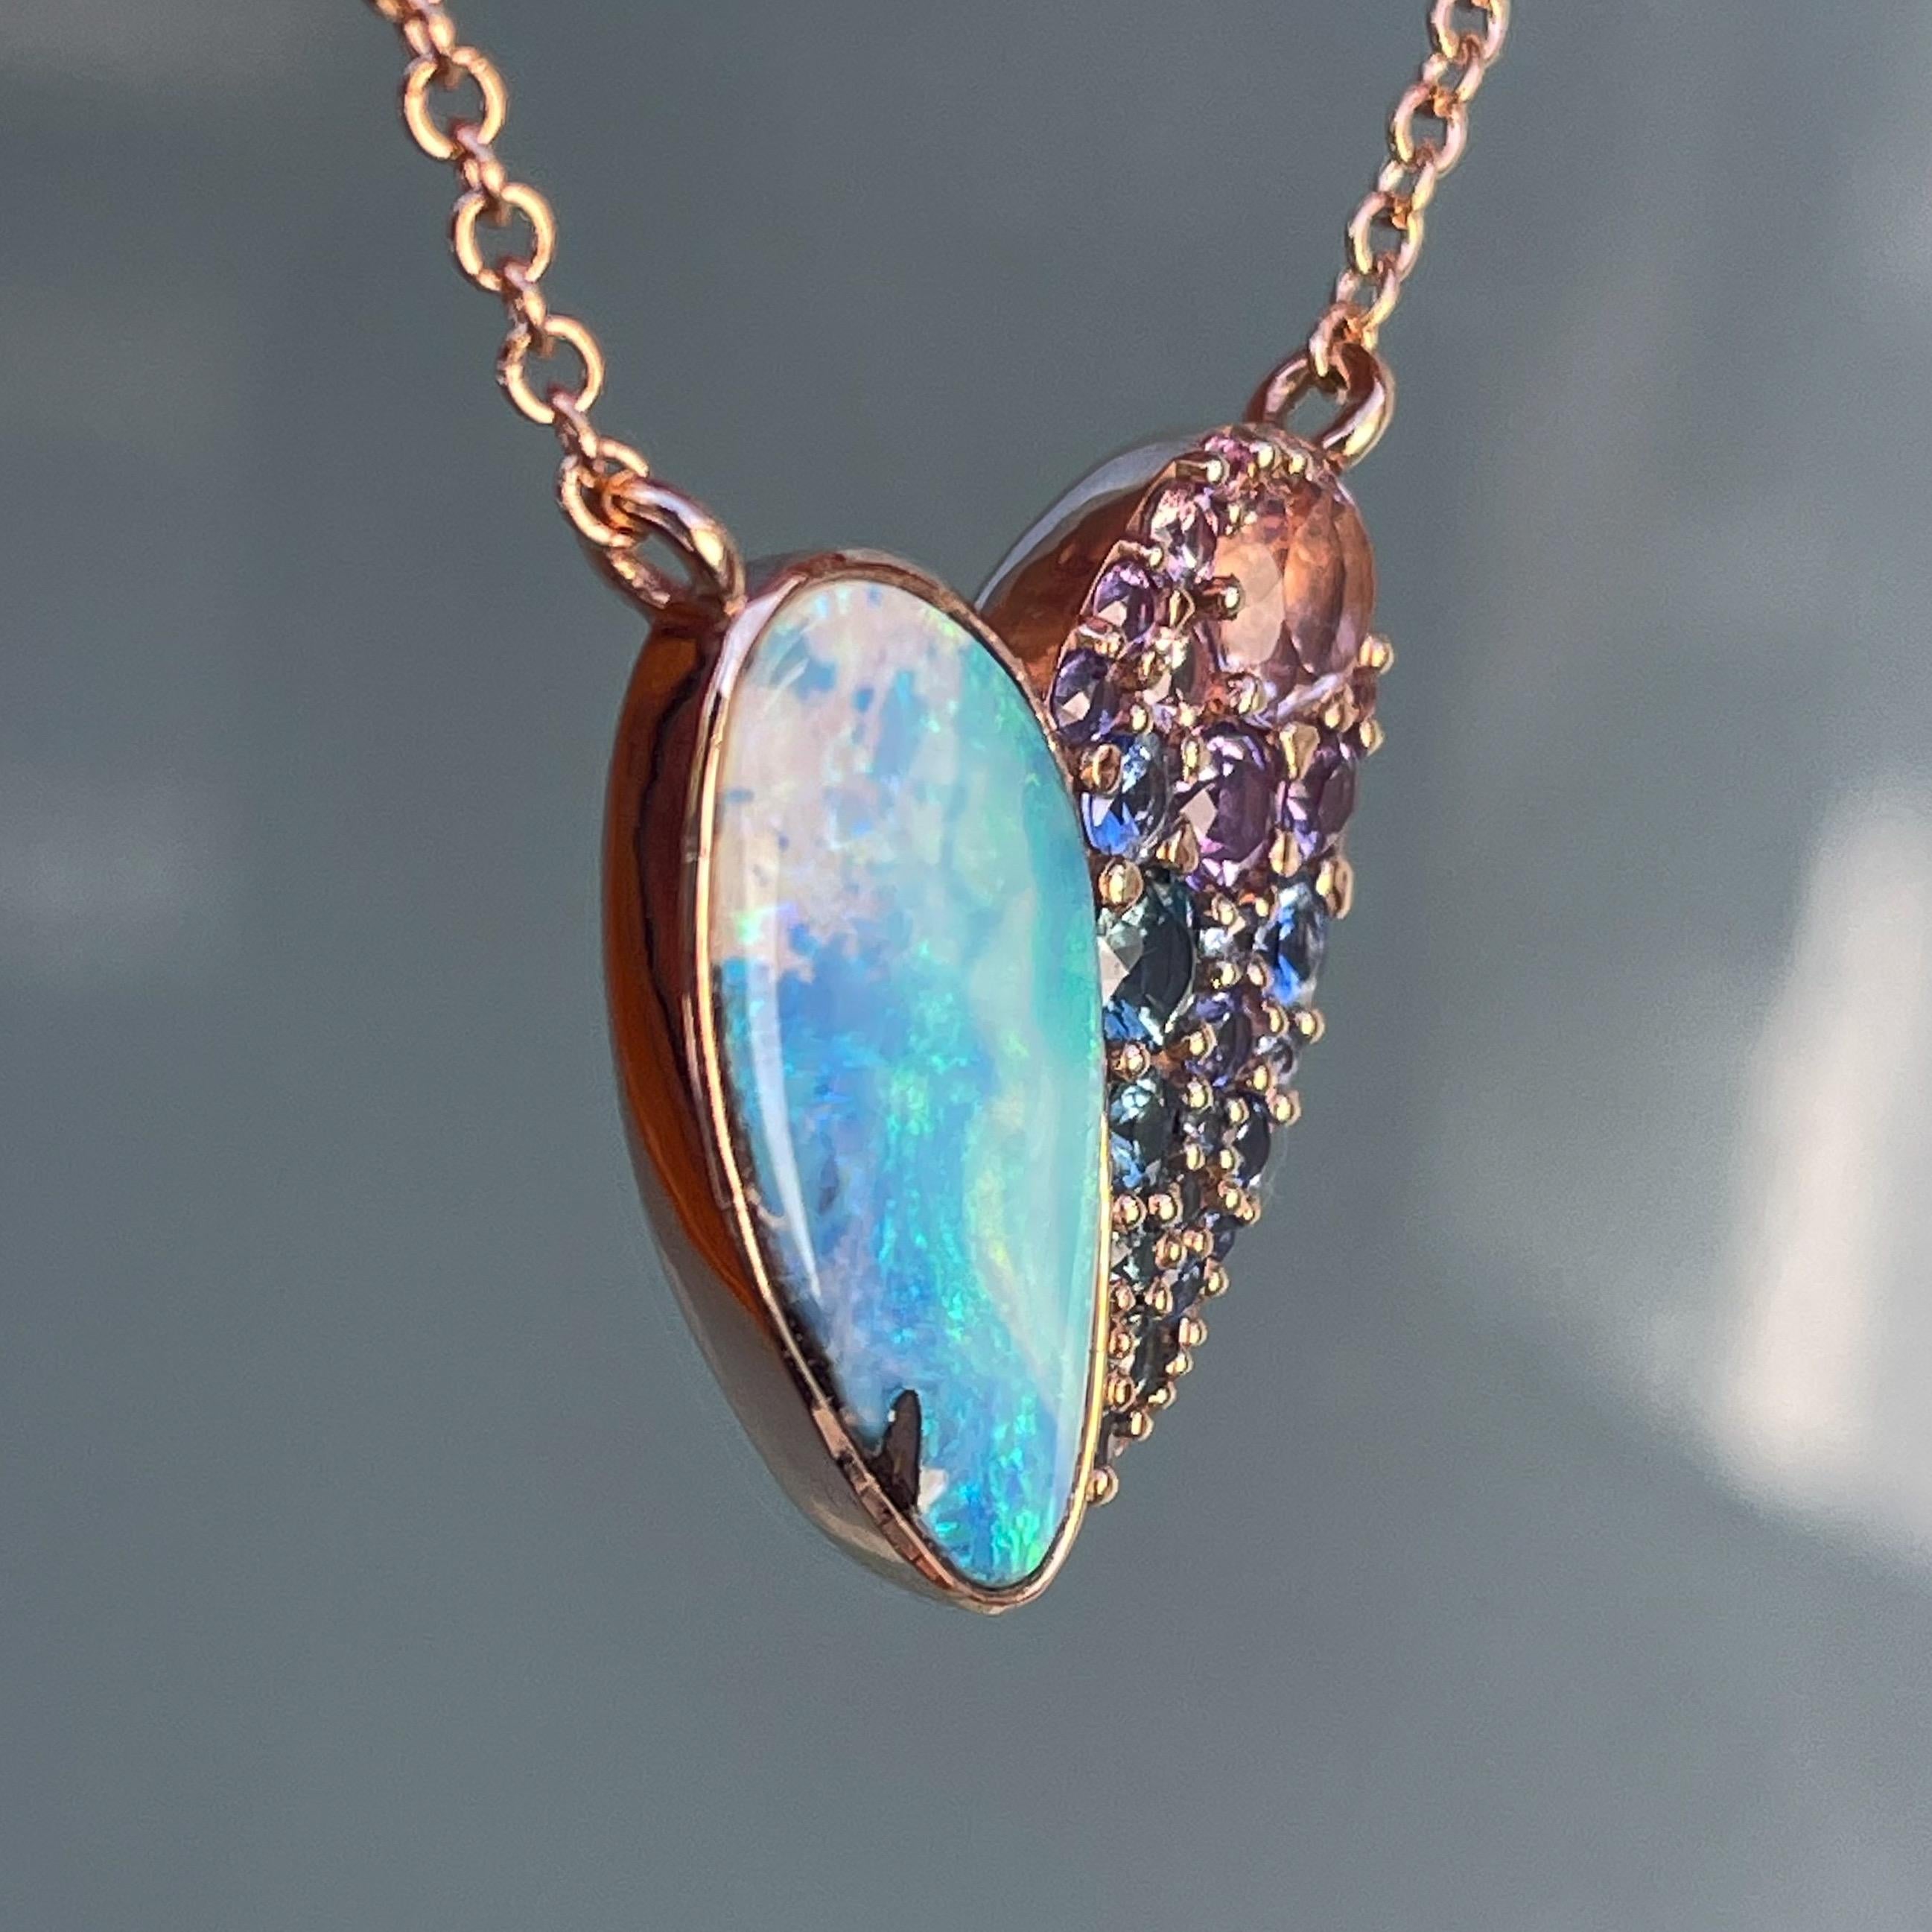 NIXIN Jewelry Cobbled Heart Opal Necklace with Sapphires in 14k Rose Gold 1